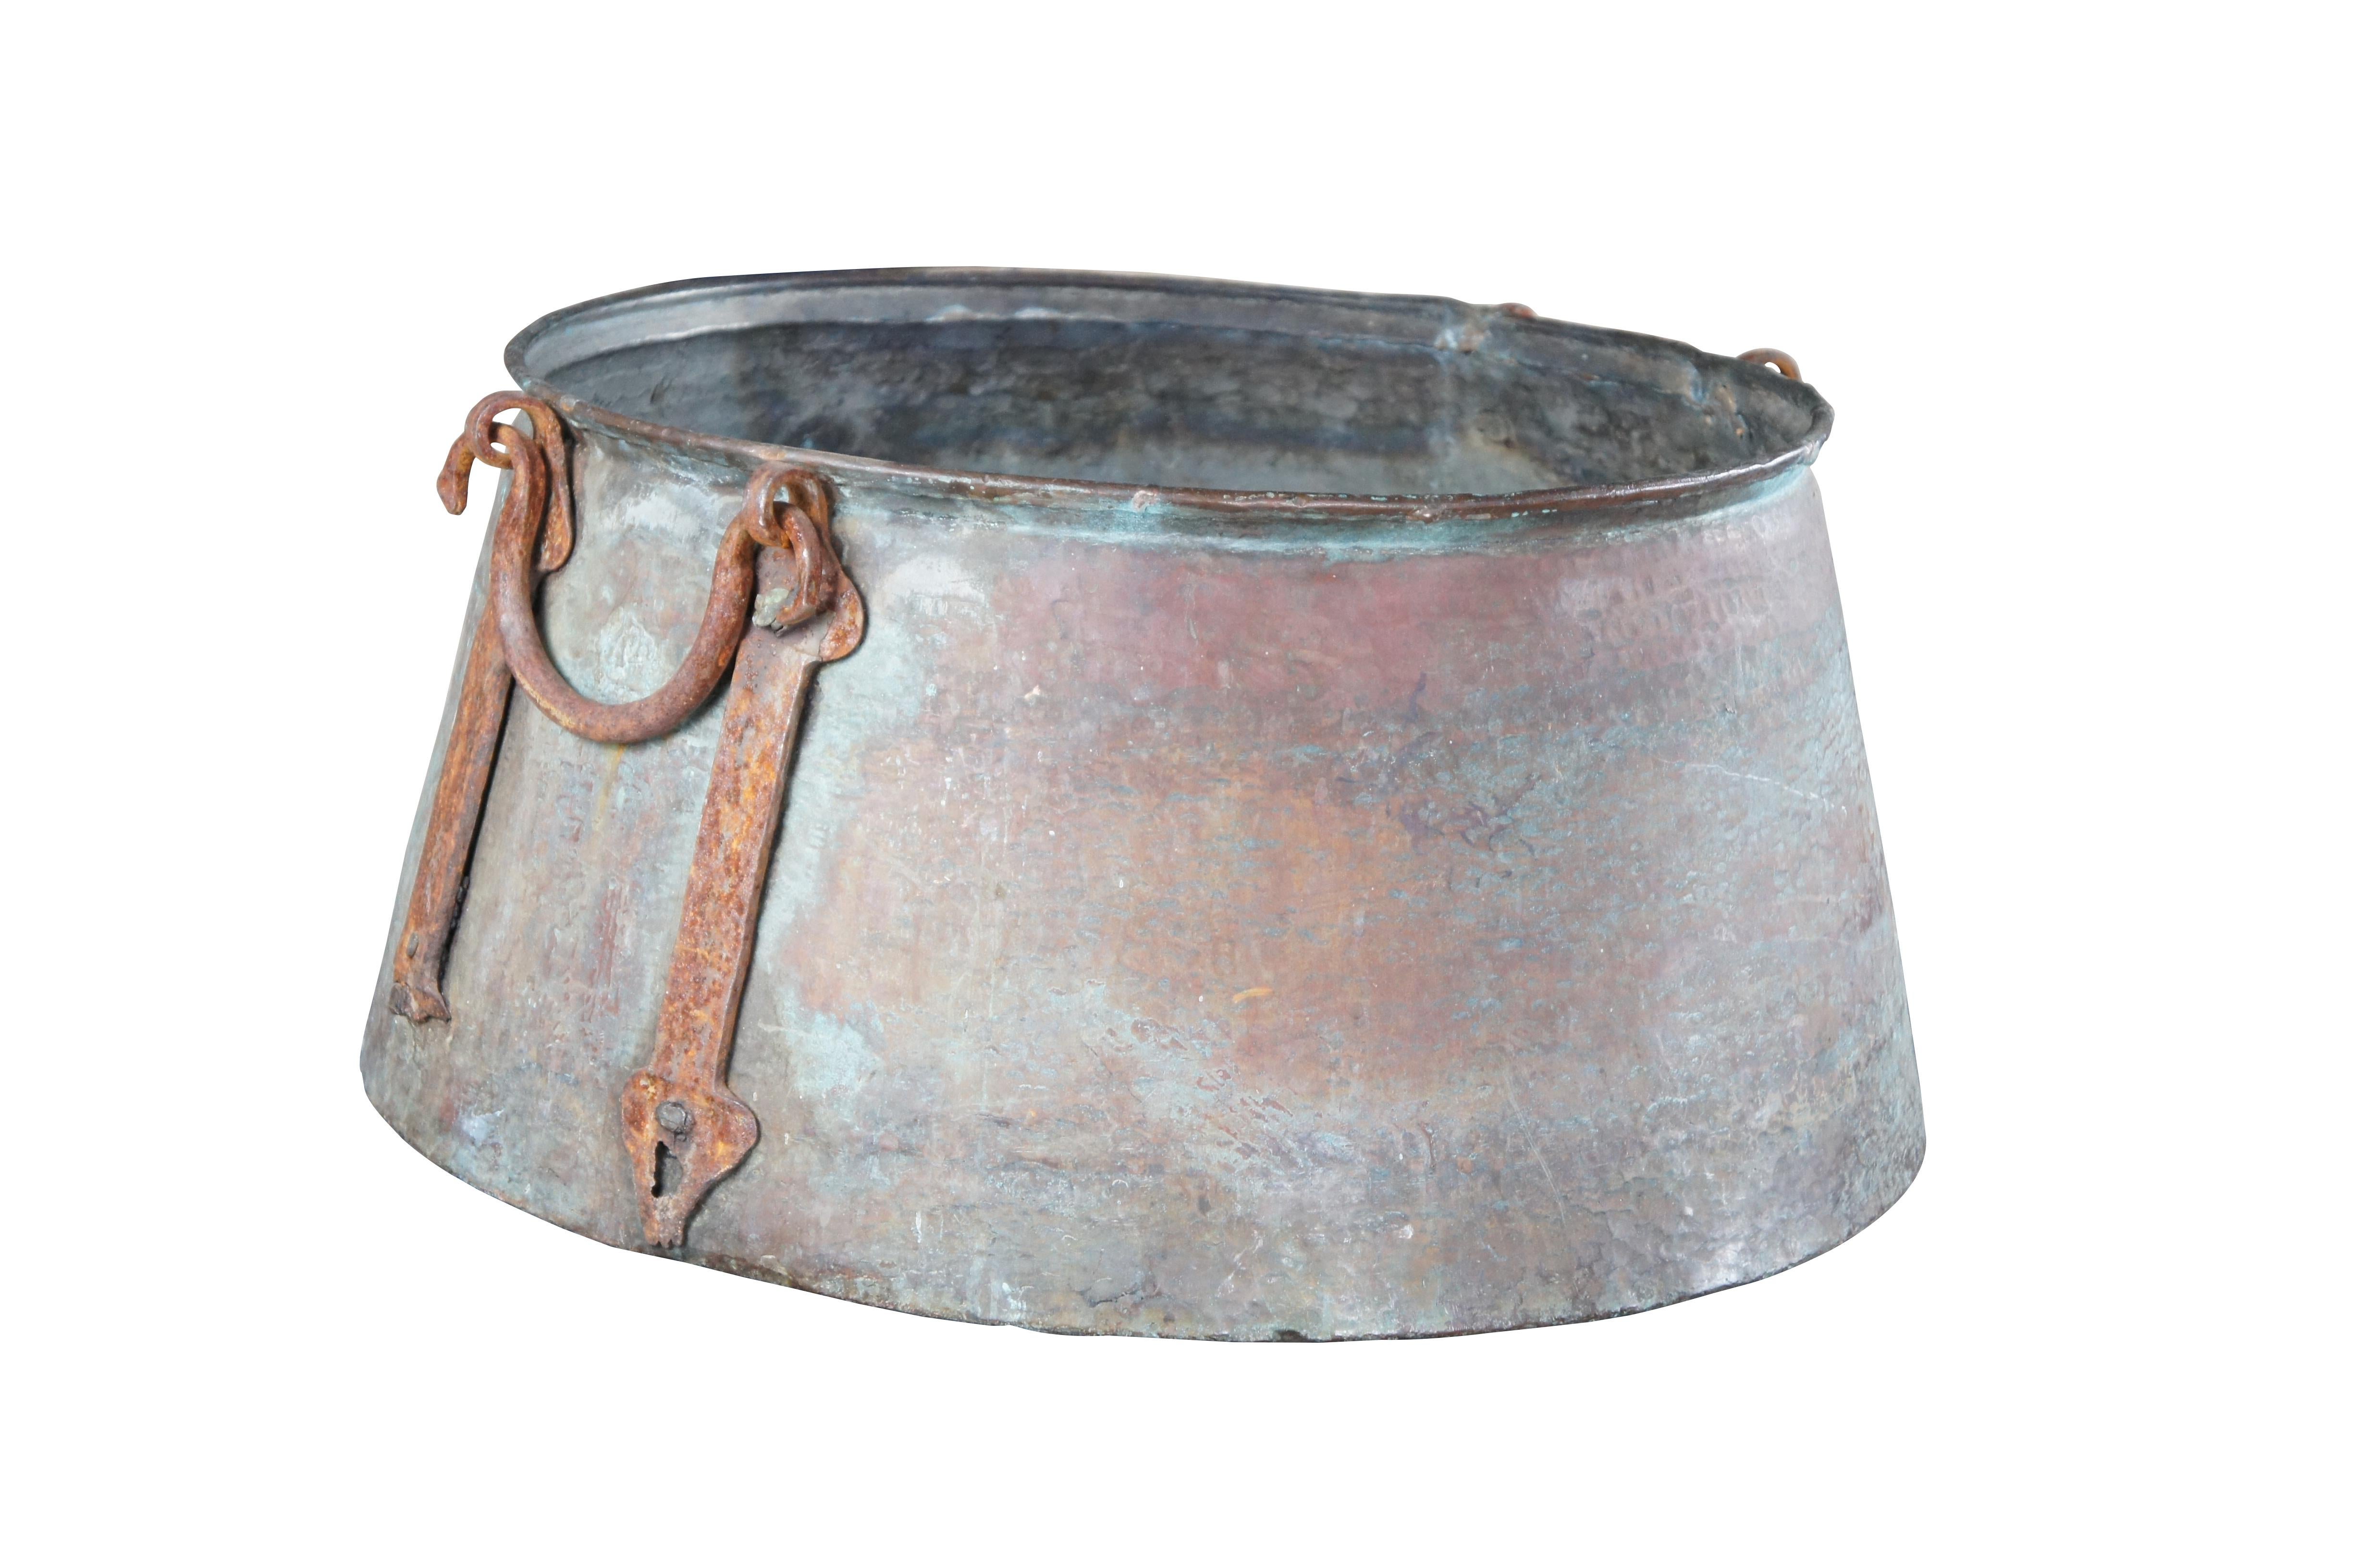 Monumental antique copper cauldron featuring hammered details with dovetailing and ornate forged iron handles.

Dimensions:
22